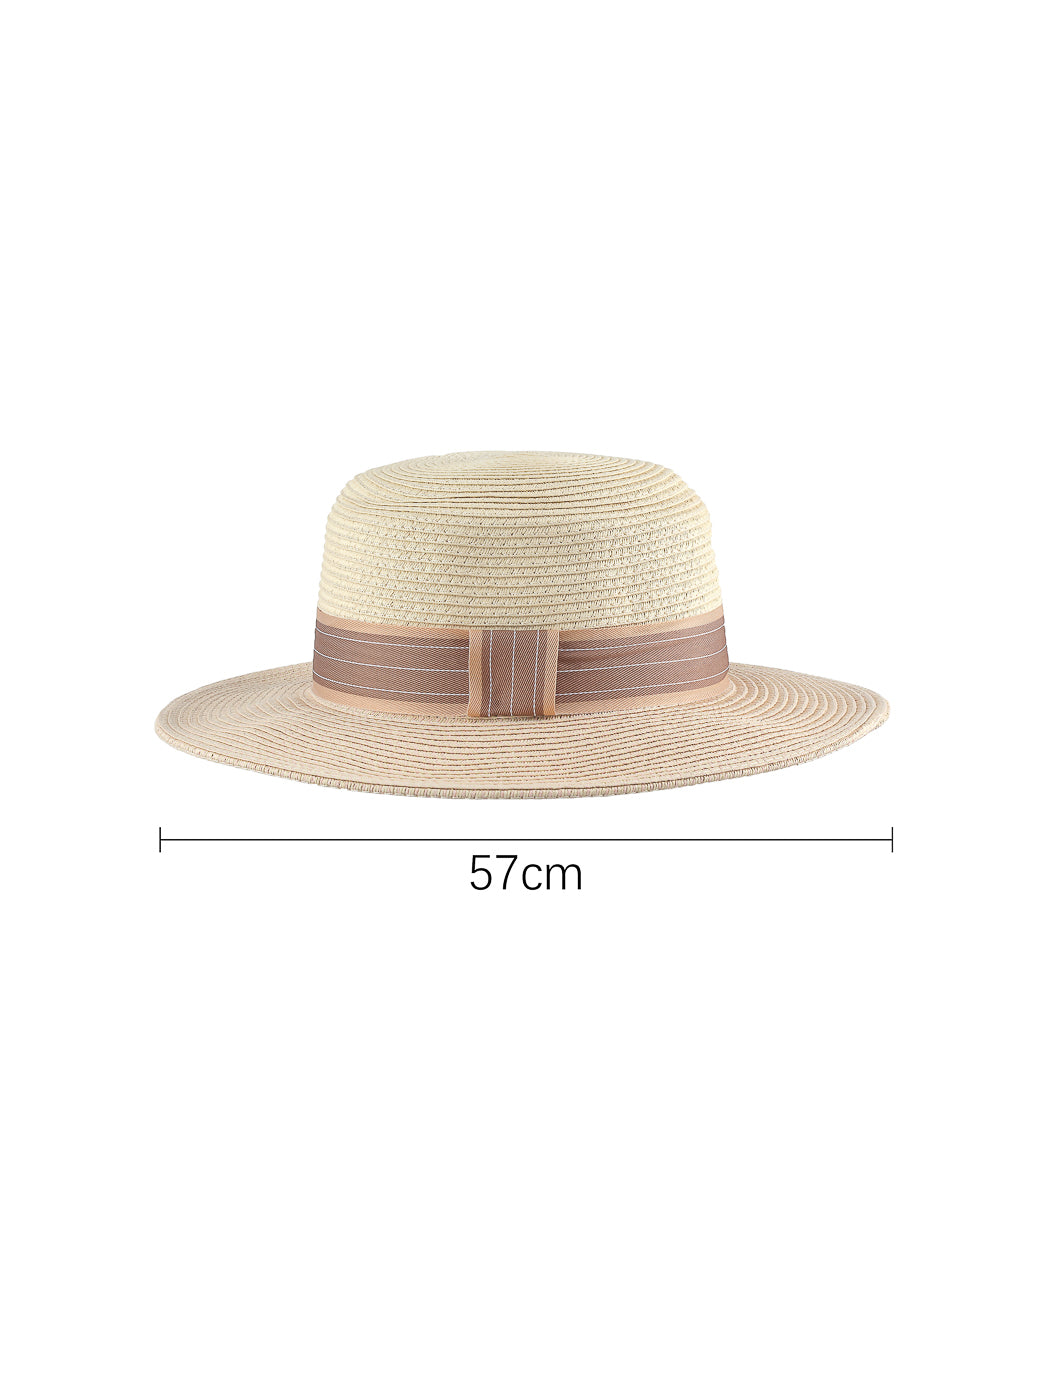 MINISO BRITISH STYLE BICOLOR STRAW HAT WITH FLAT TOP ( PINK ) 2010116810101 FASHIONABLE HAT